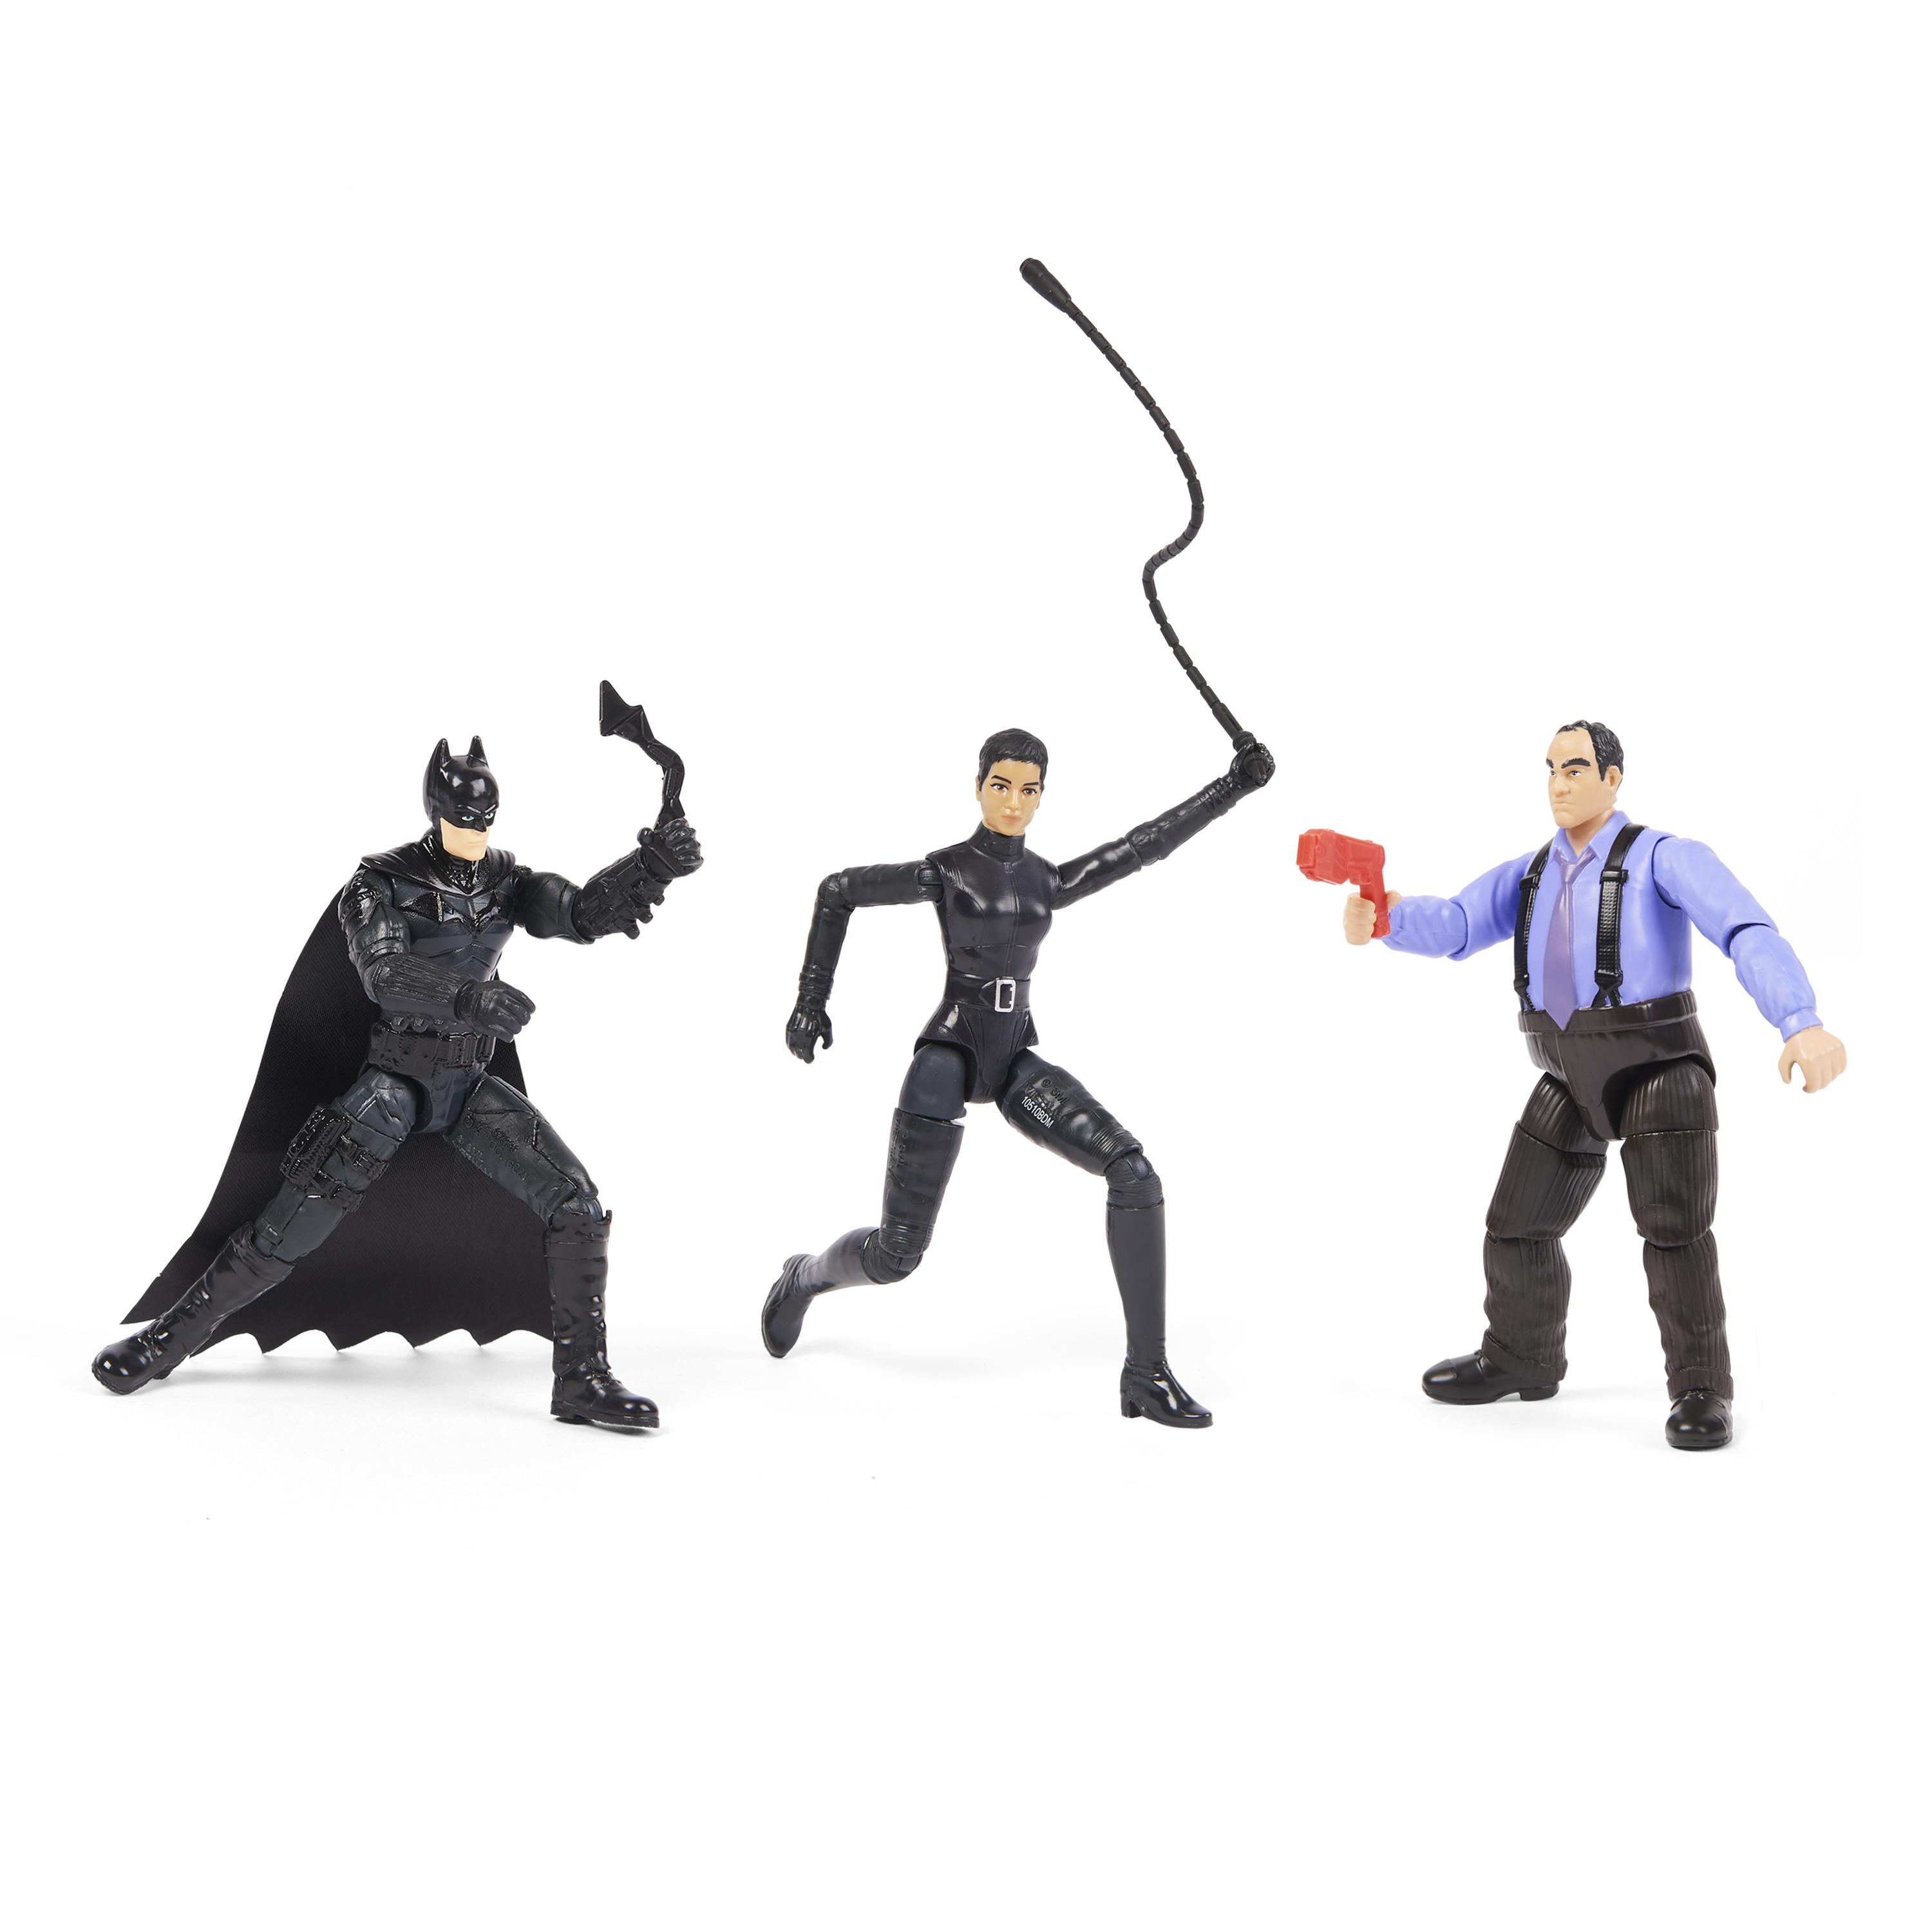 4-inch figure 3-pack unboxed